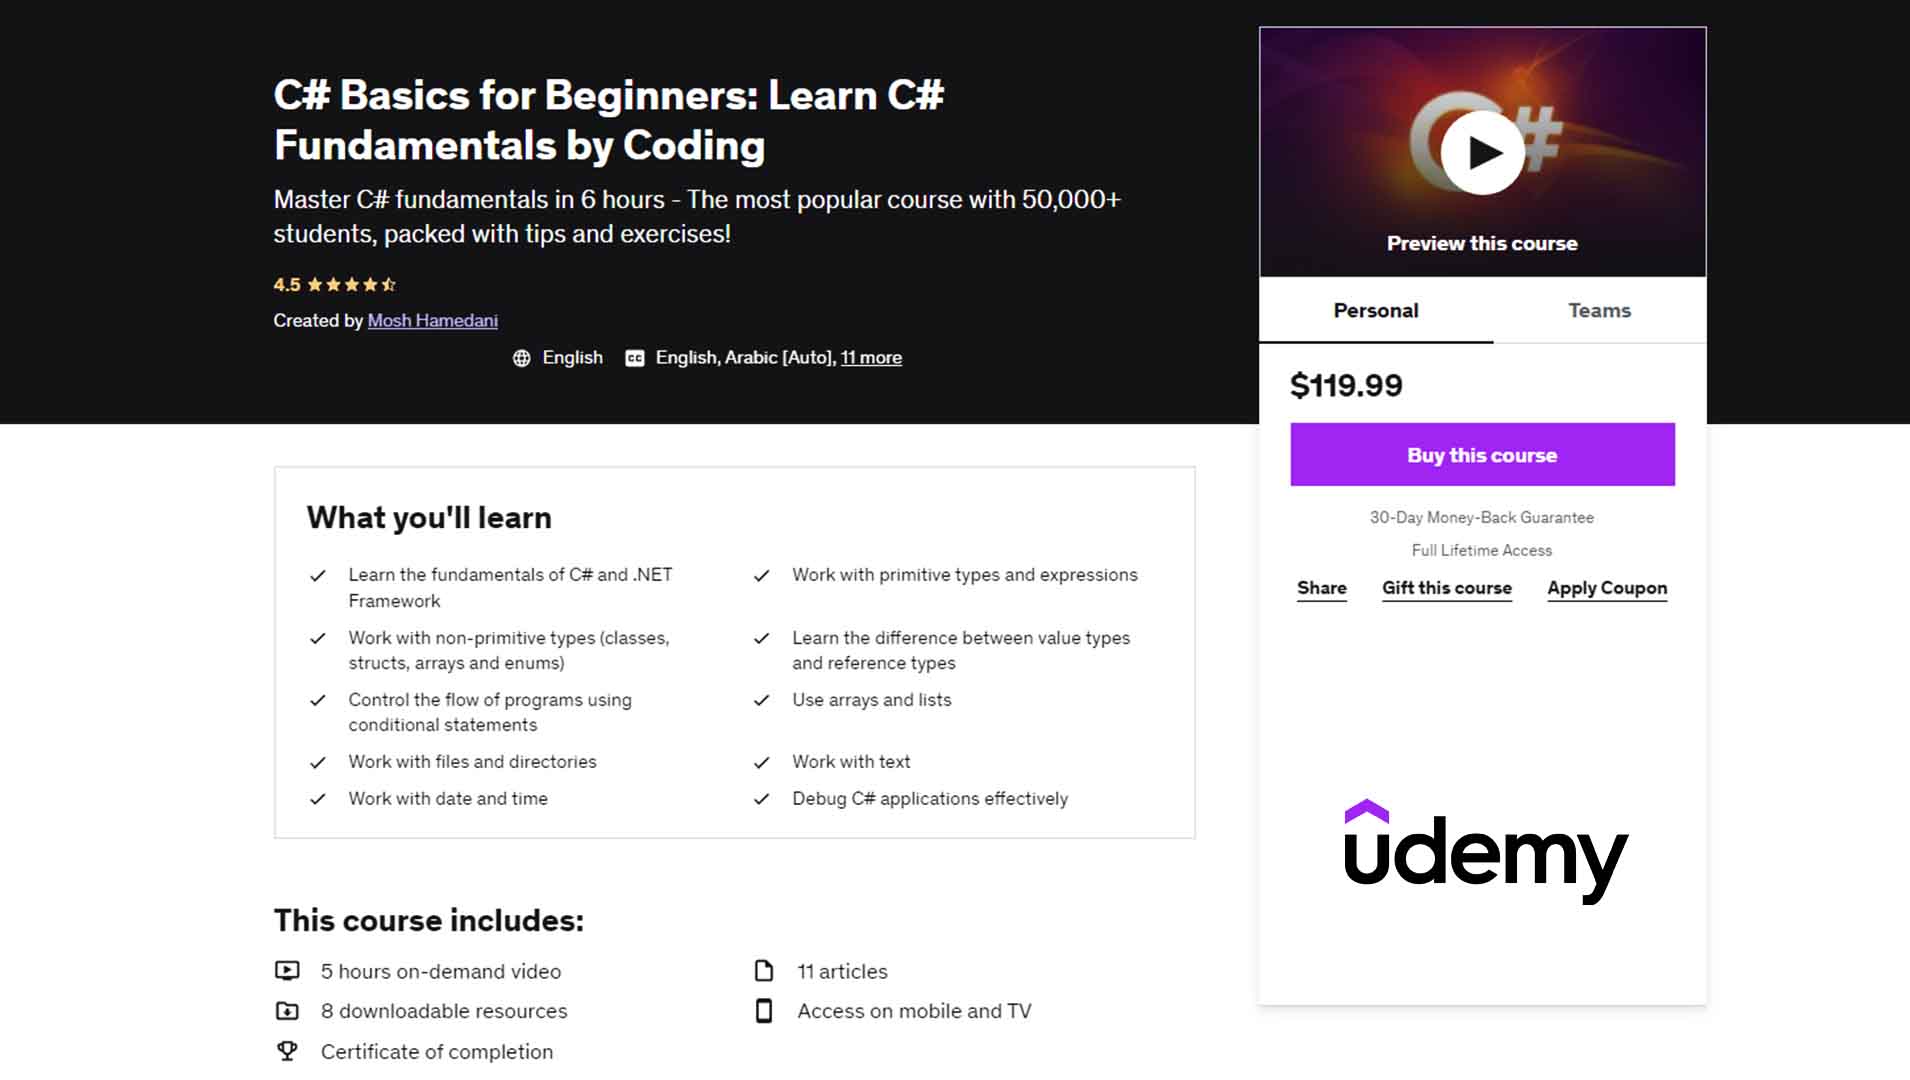 C# Basics for Beginners: Learn C# Fundamentals by Coding